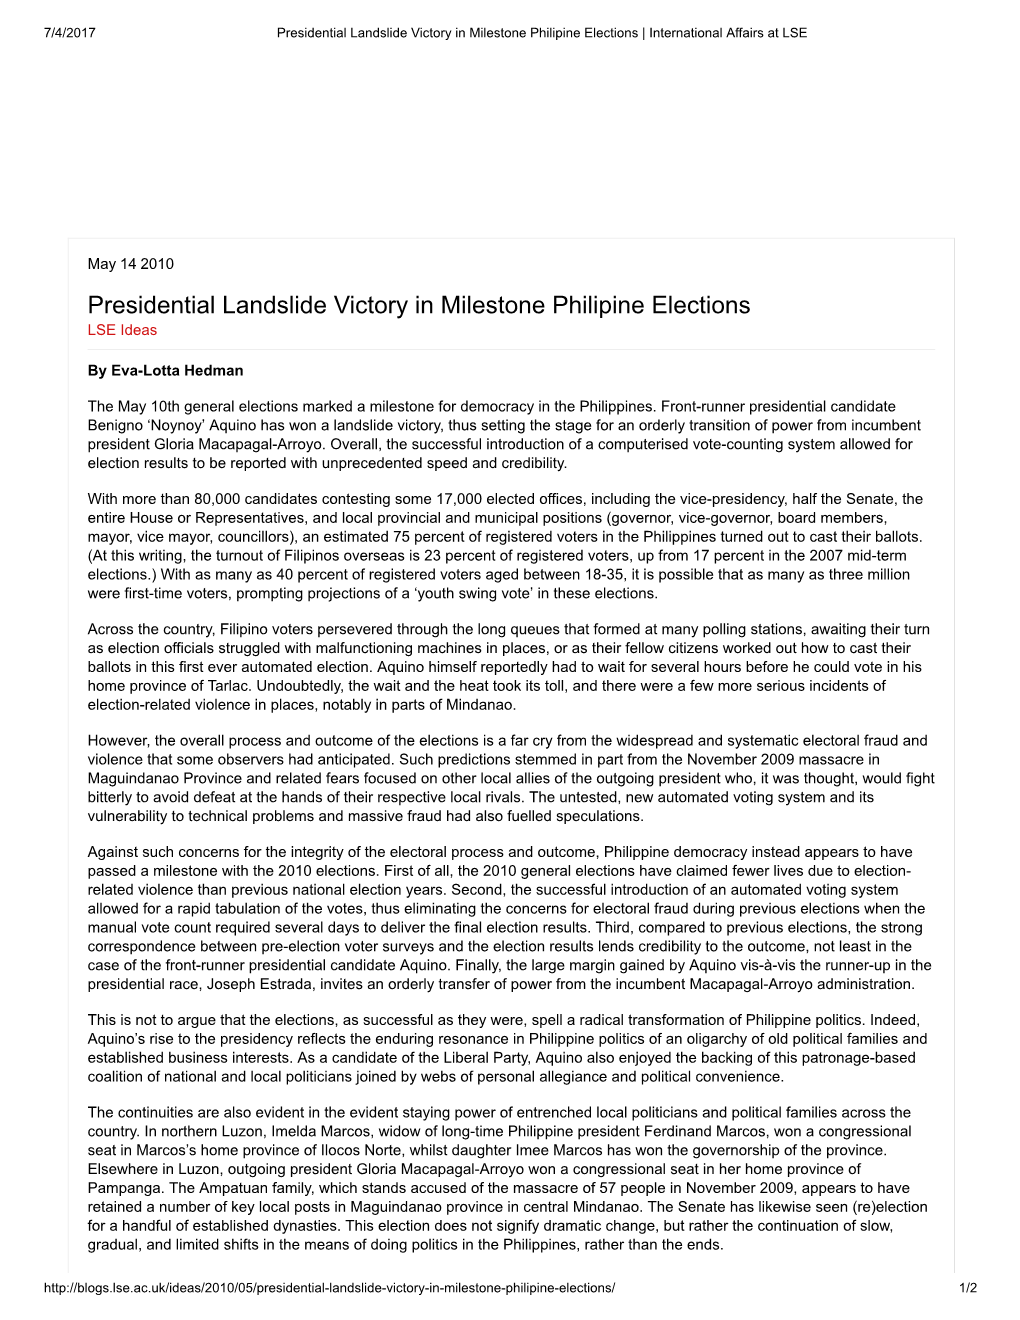 Presidential Landslide Victory in Milestone Philipine Elections | International Affairs at LSE